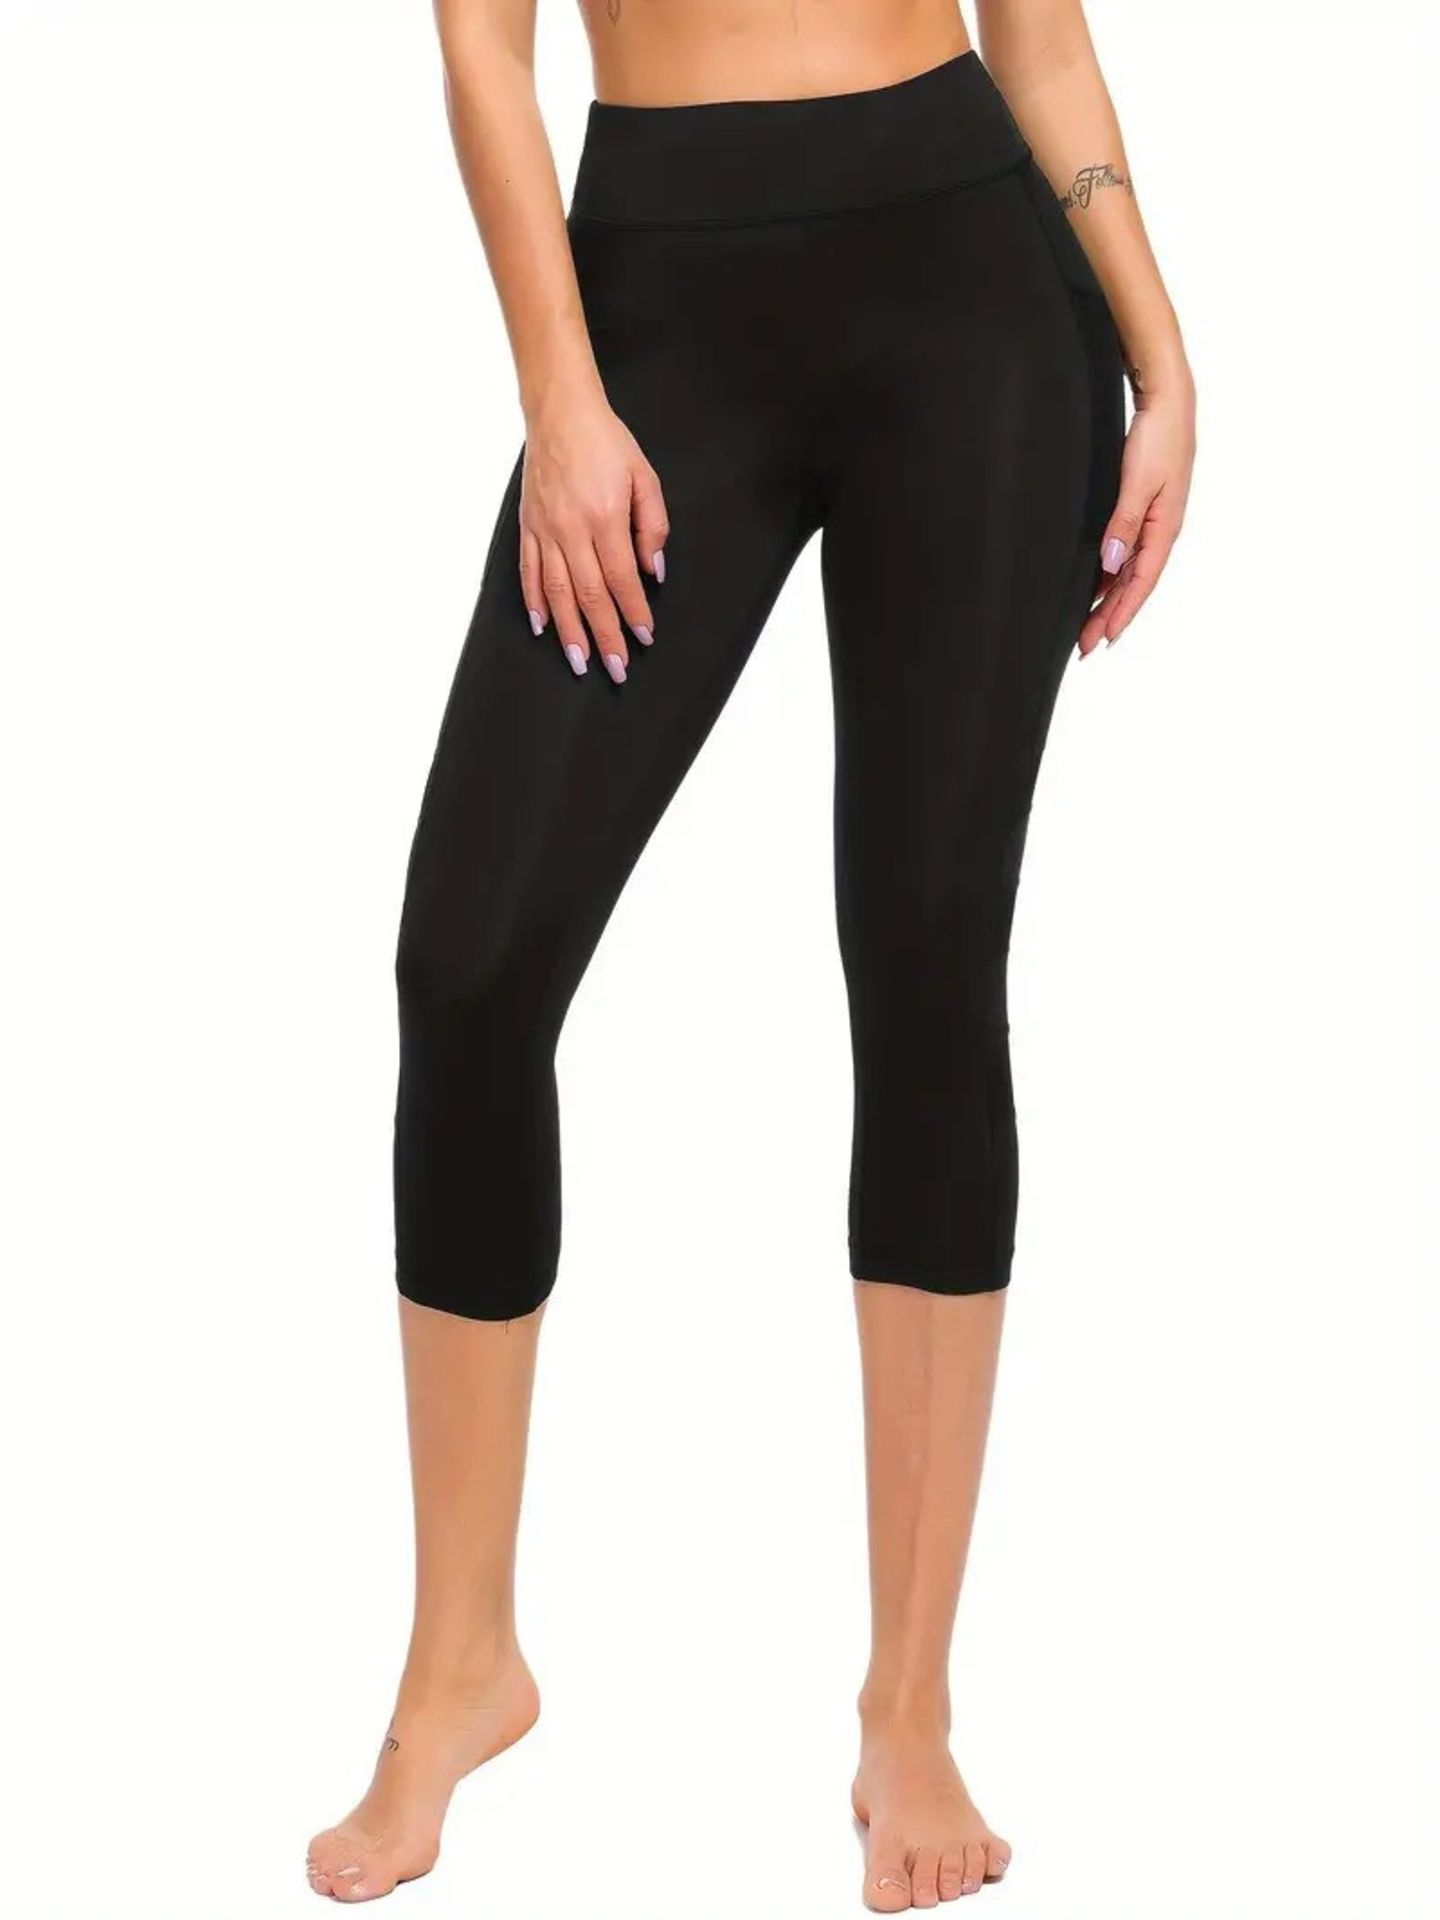 [NEW] Mesh Contrast Breathable Sports Yoga Capri Leggings, High Waist Stretch Workout - Image 2 of 2